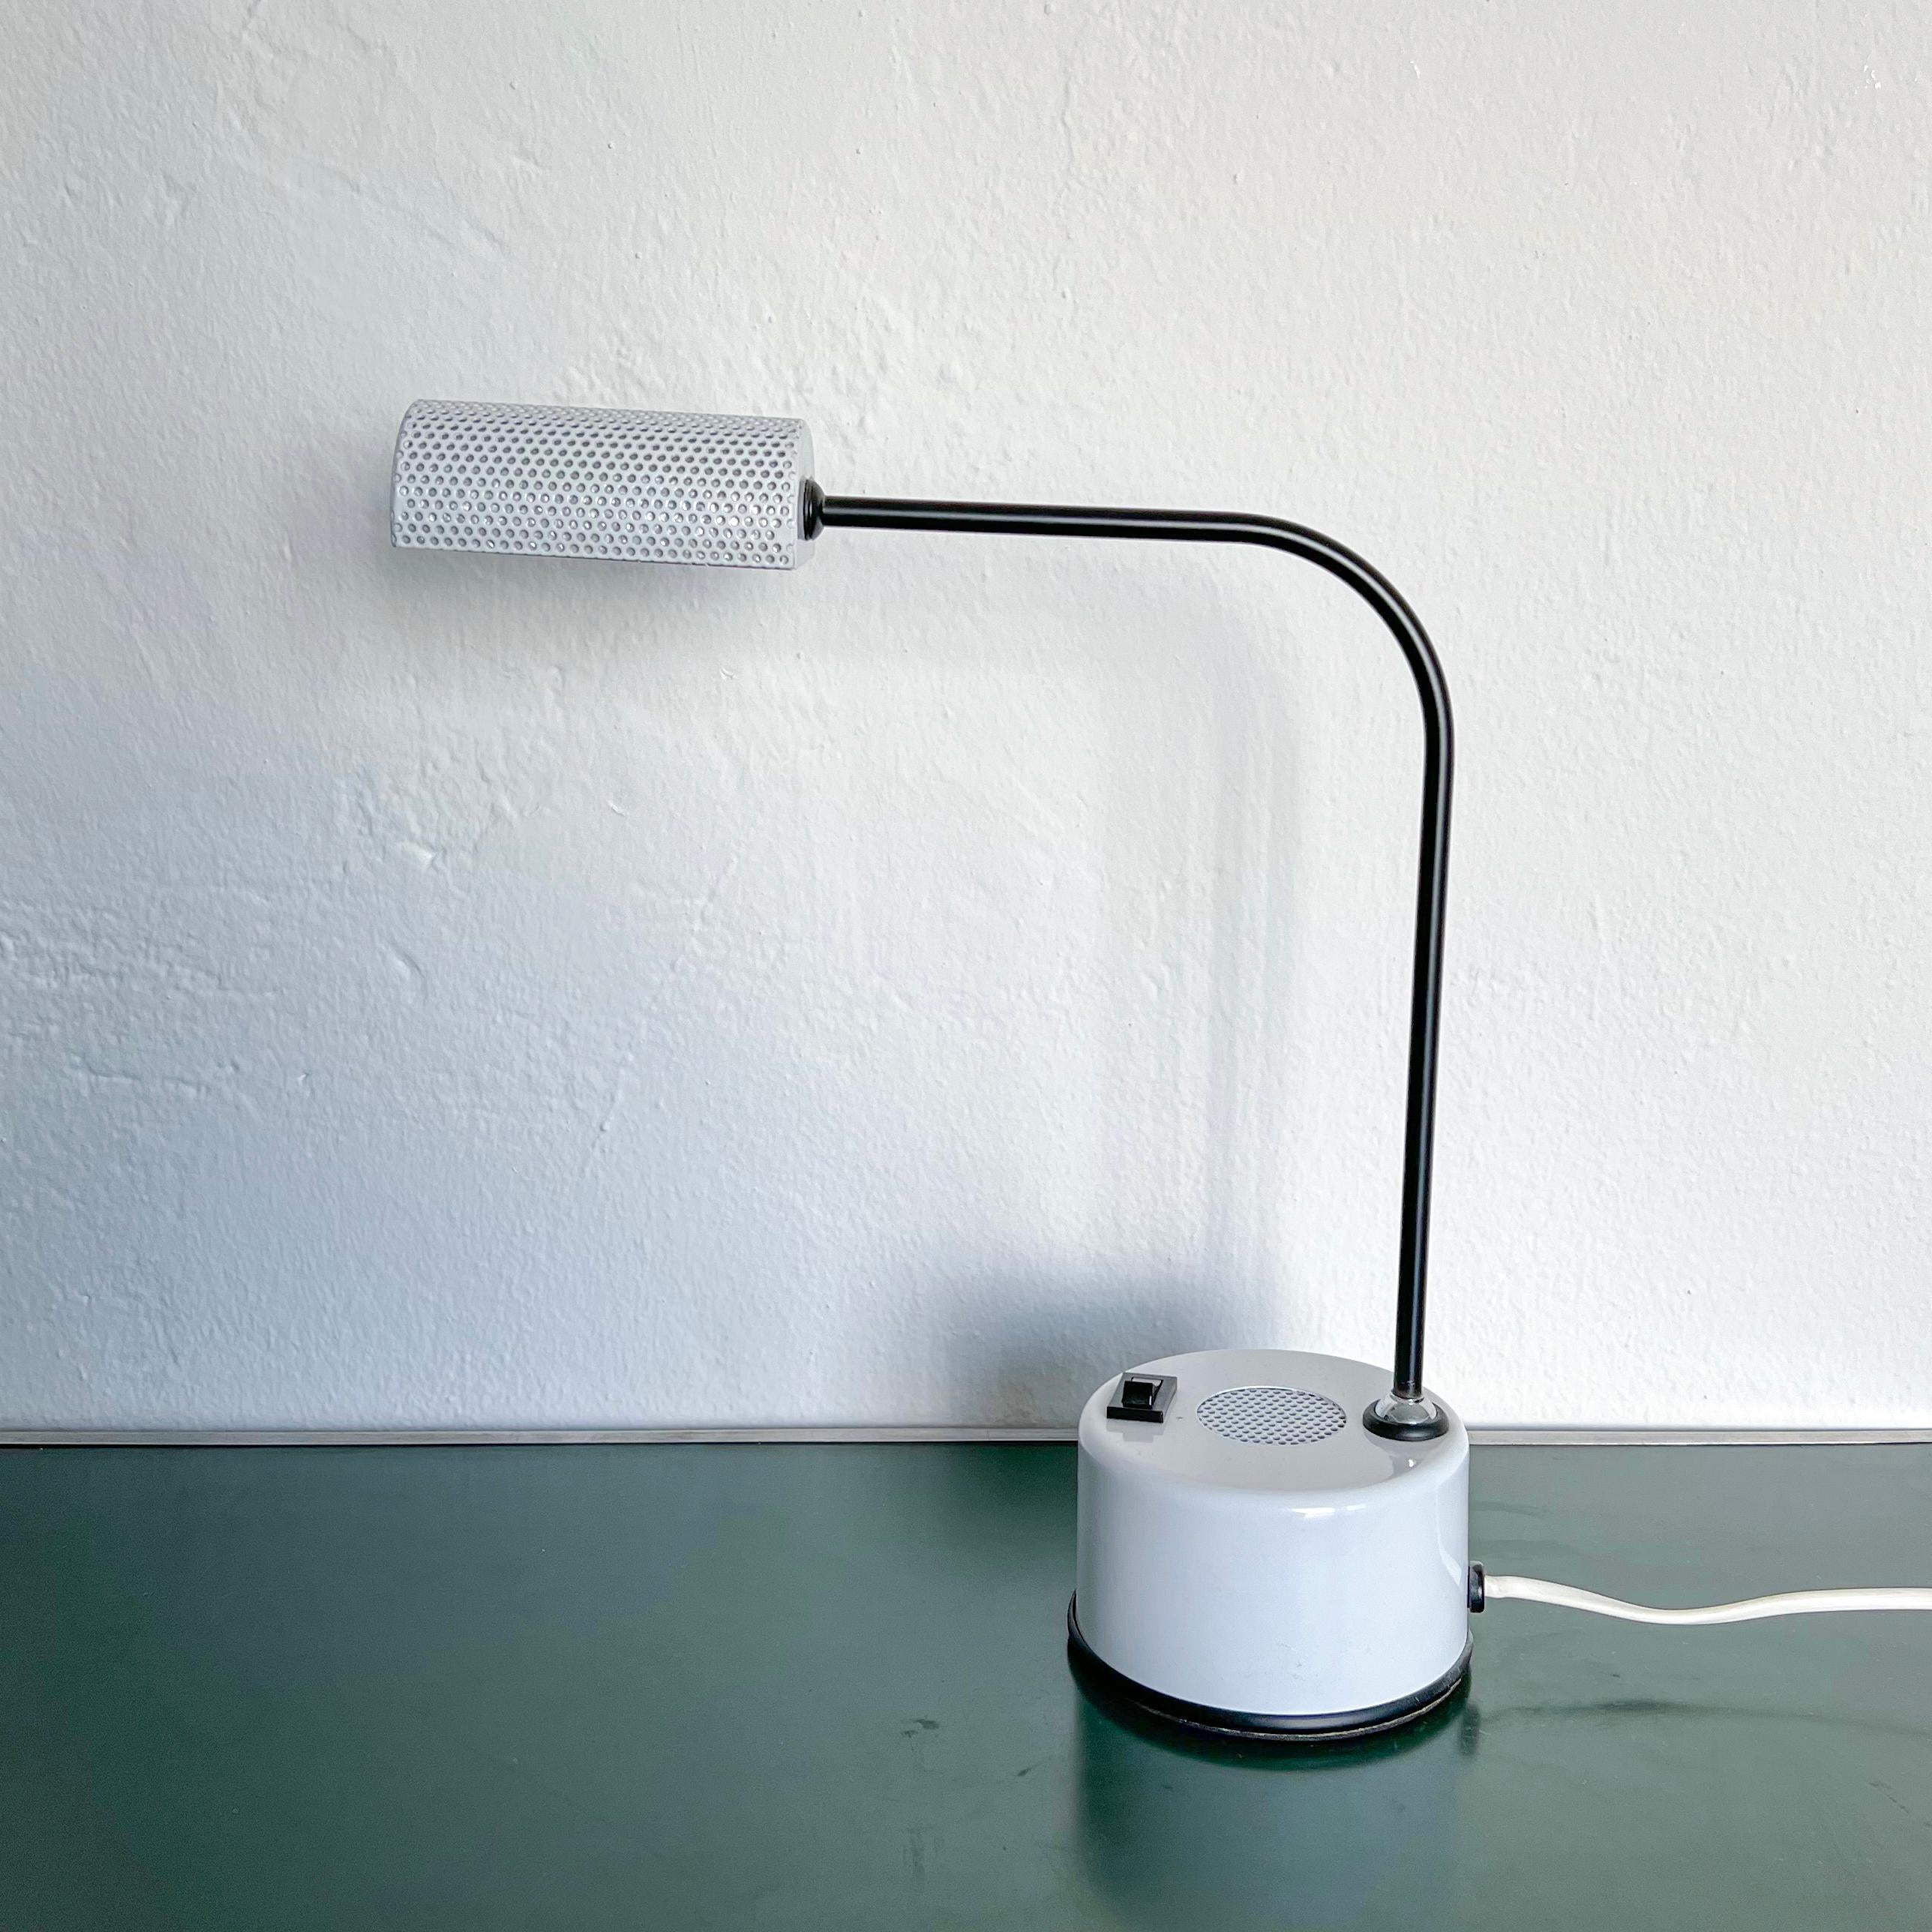 This is a cool little desk lamp, dating back to the early Eighties and crafted in white and black metal. The main arm can be tilted and oriented, and the lampshade can be rotated, thus directing light in the preferred direction.

Some details,